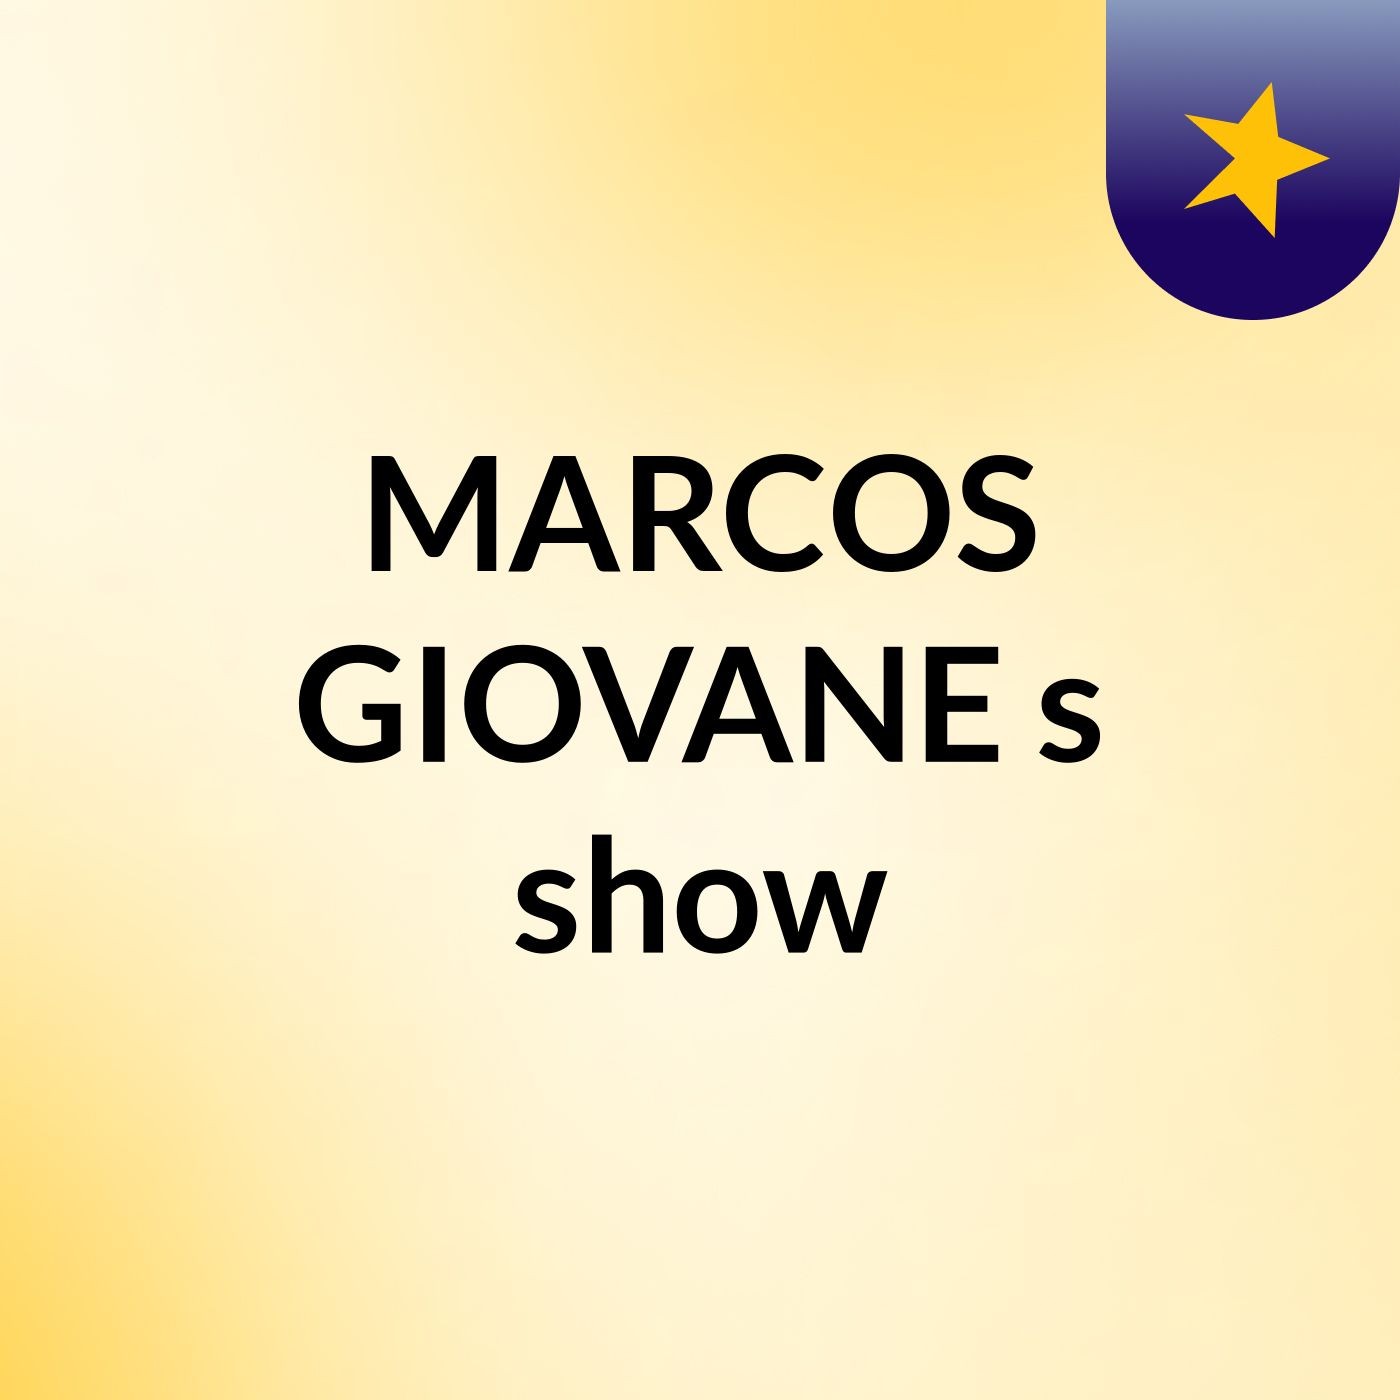 MARCOS GIOVANE's show